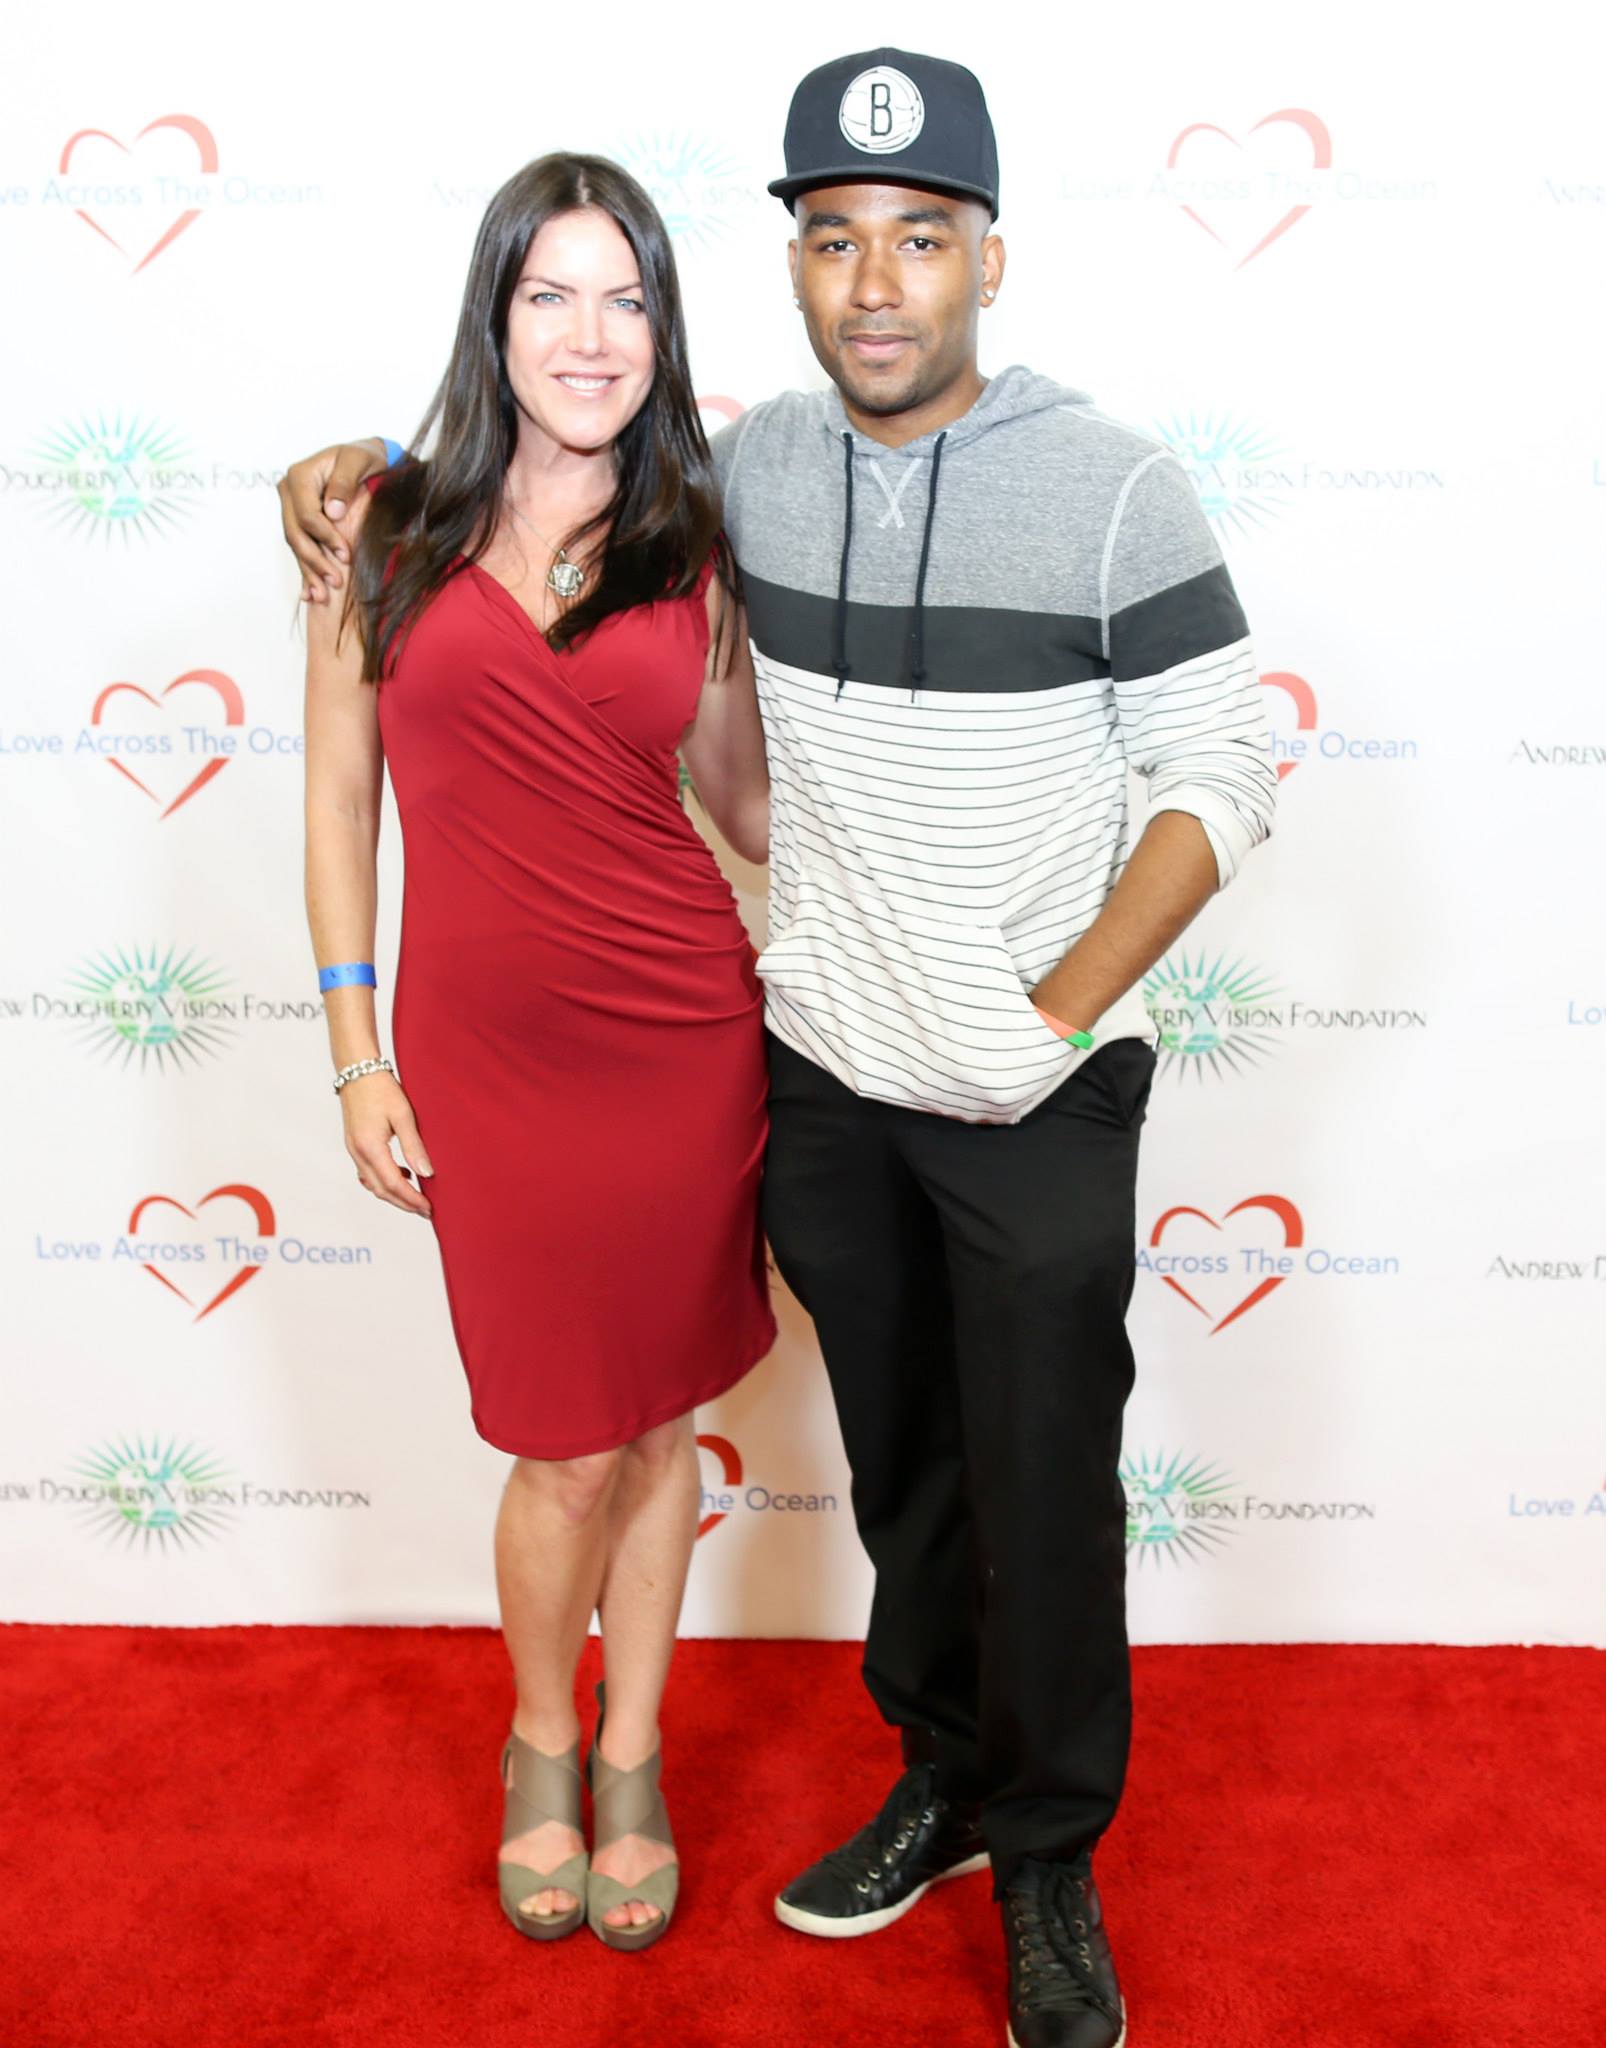 Kira Reed Lorsch and Derrell Whitt of The Bay The Series at LoveAcrossTheOcean.org 7th Annual Celebrity Poker Tournament